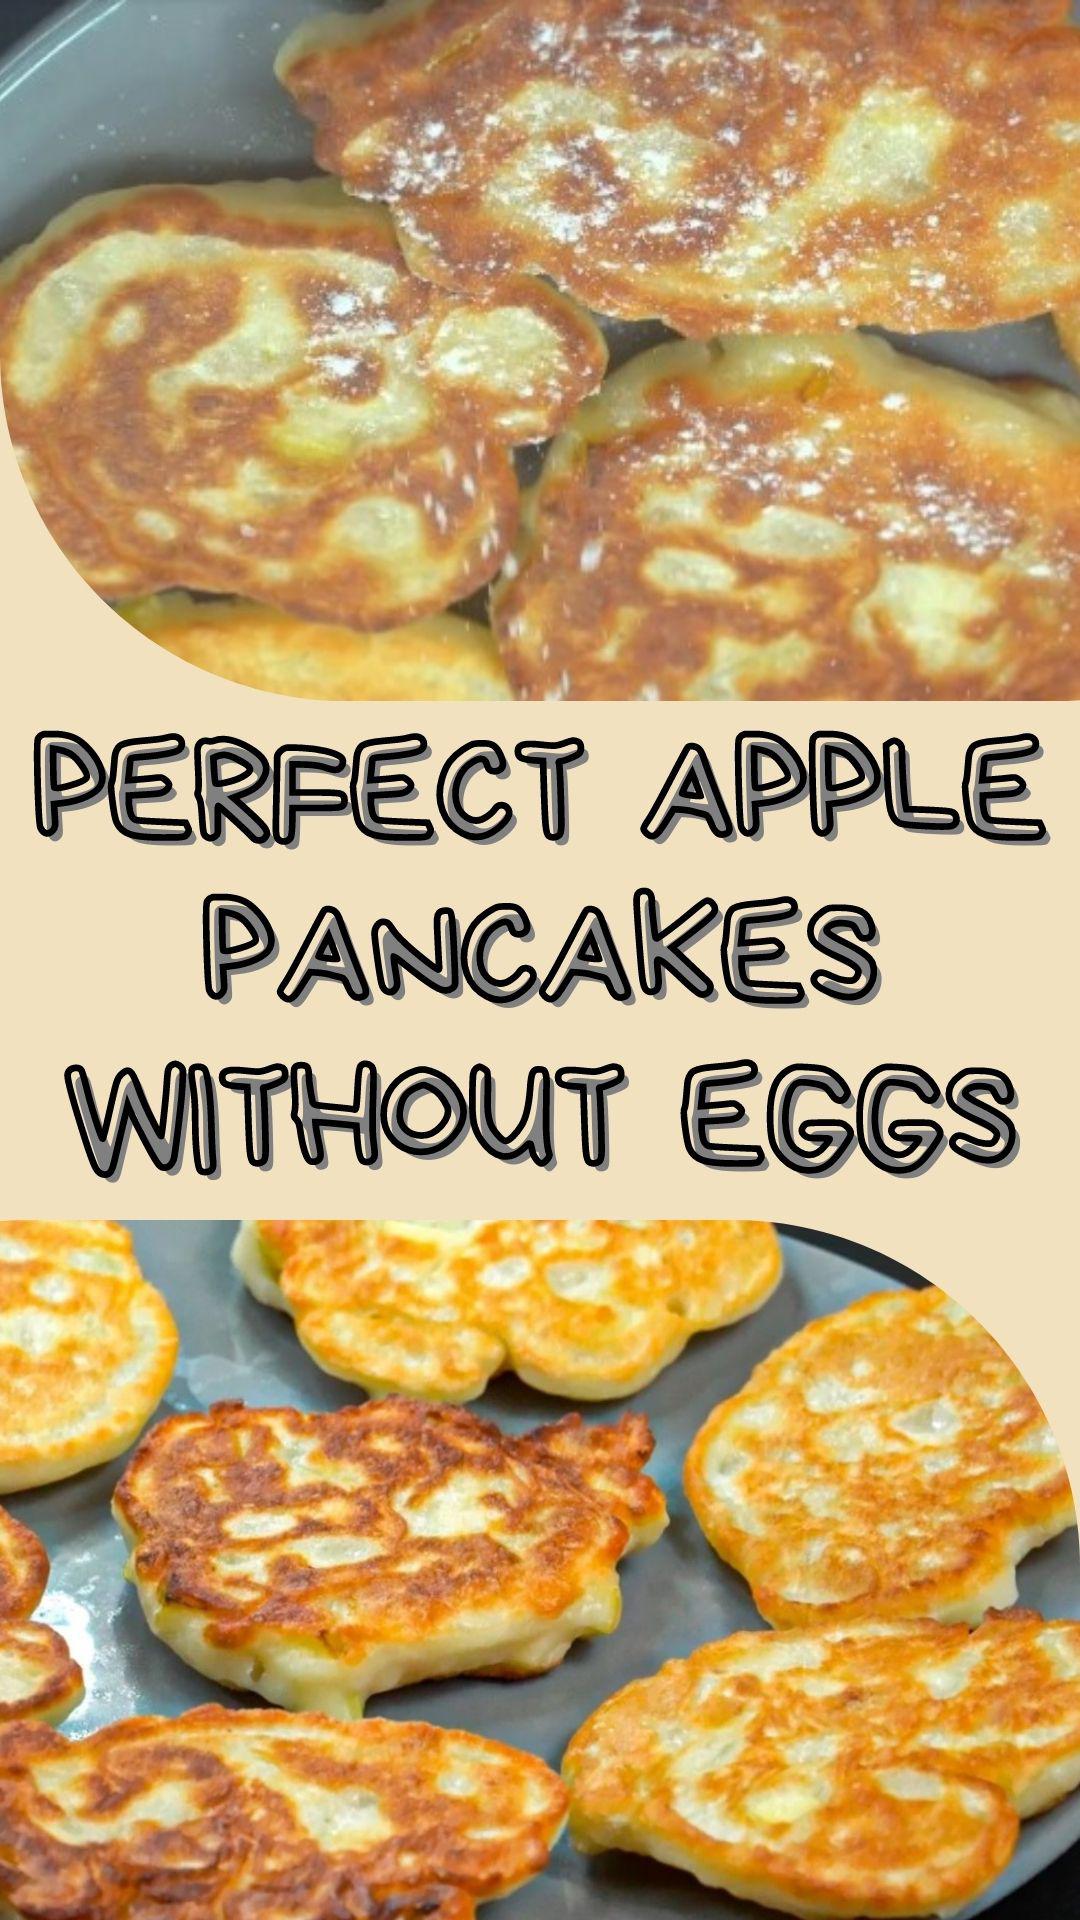 Perfect apple pancakes without eggs